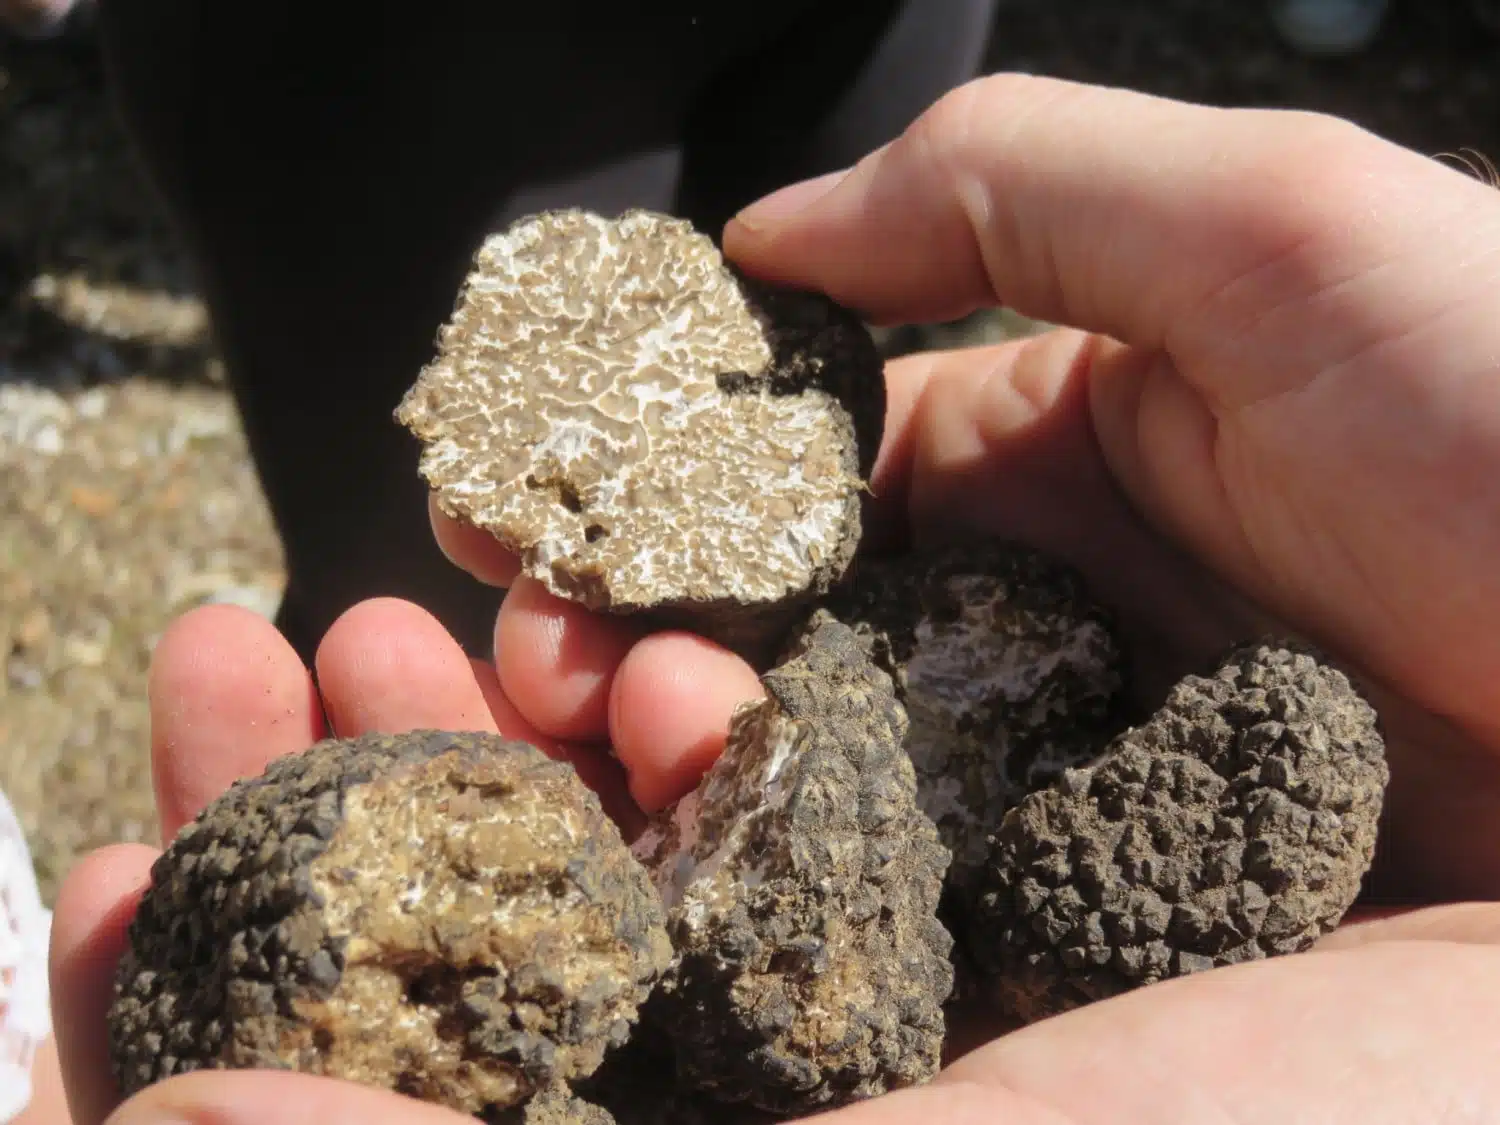 Truffle hunting in Umbria - one of the best things to do in Umbria